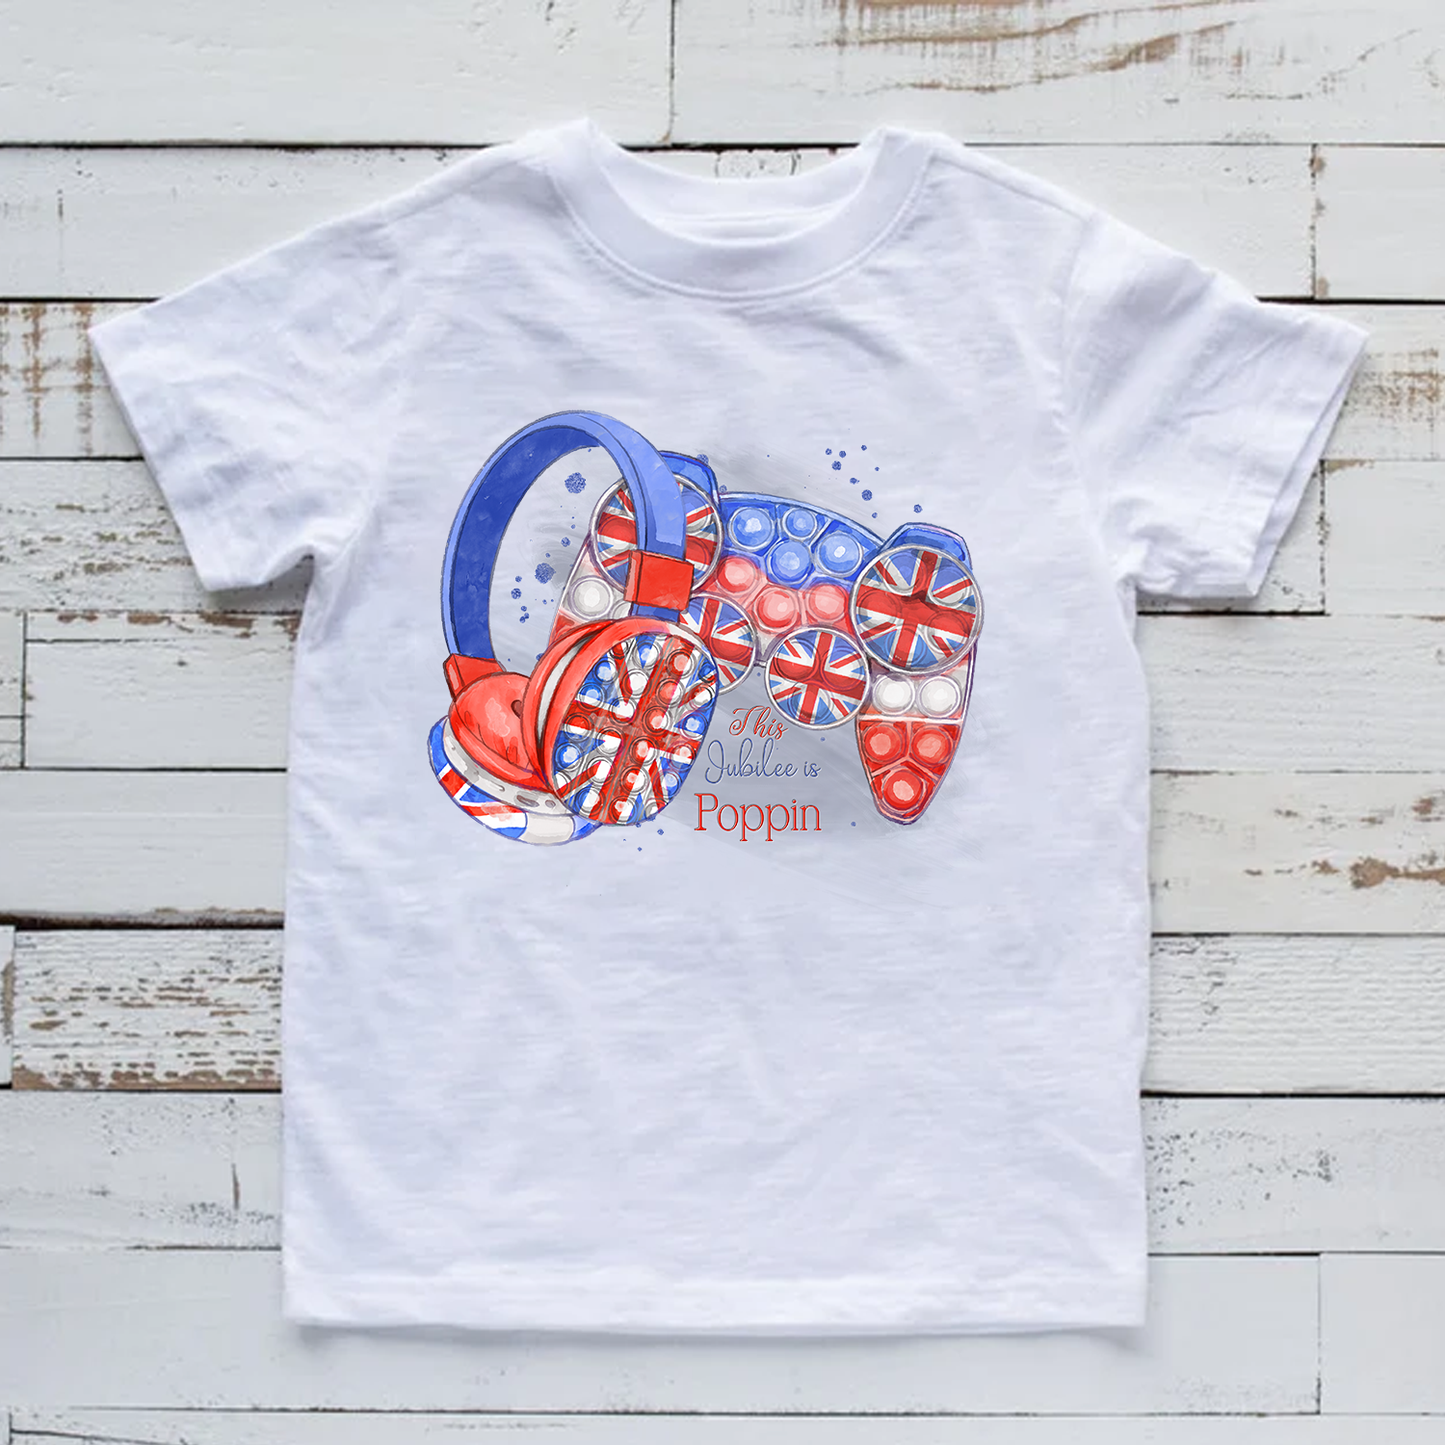 This Jubilee is Poppin' White T-Shirt - Queen's Jubilee Celebrations